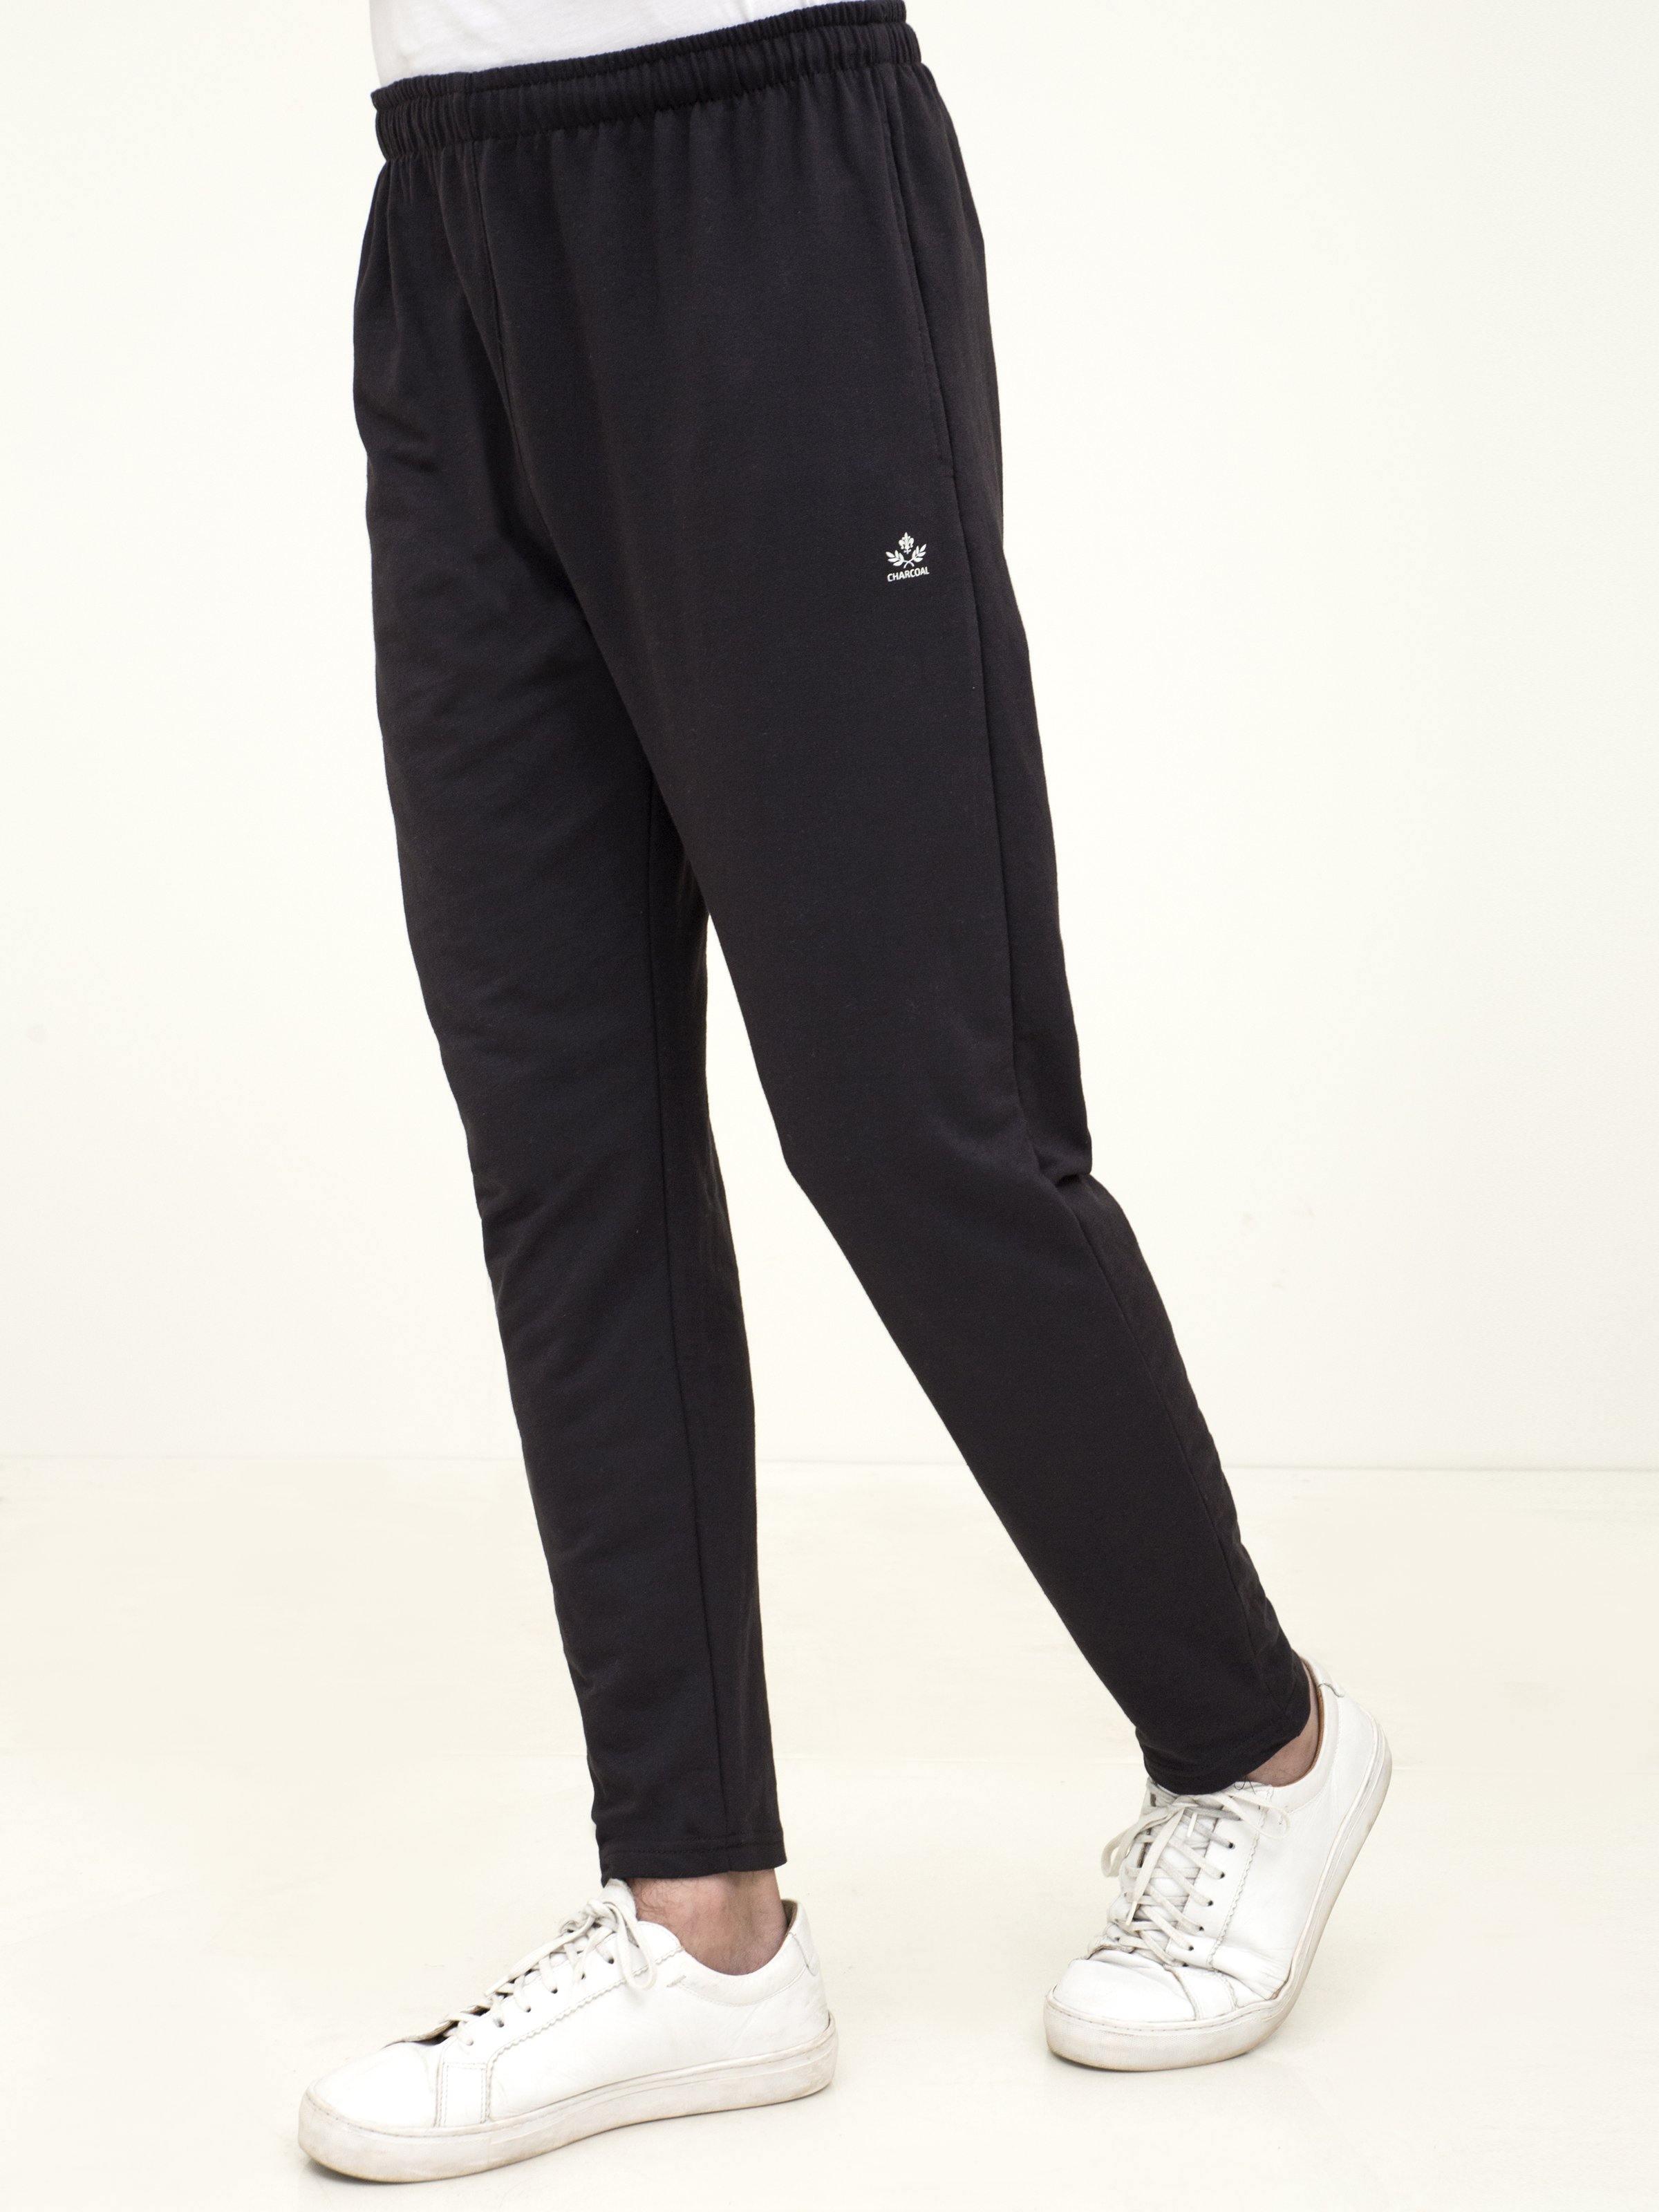 CASUAL TROUSER KNITE SLEEPWEAR BLACK at Charcoal Clothing